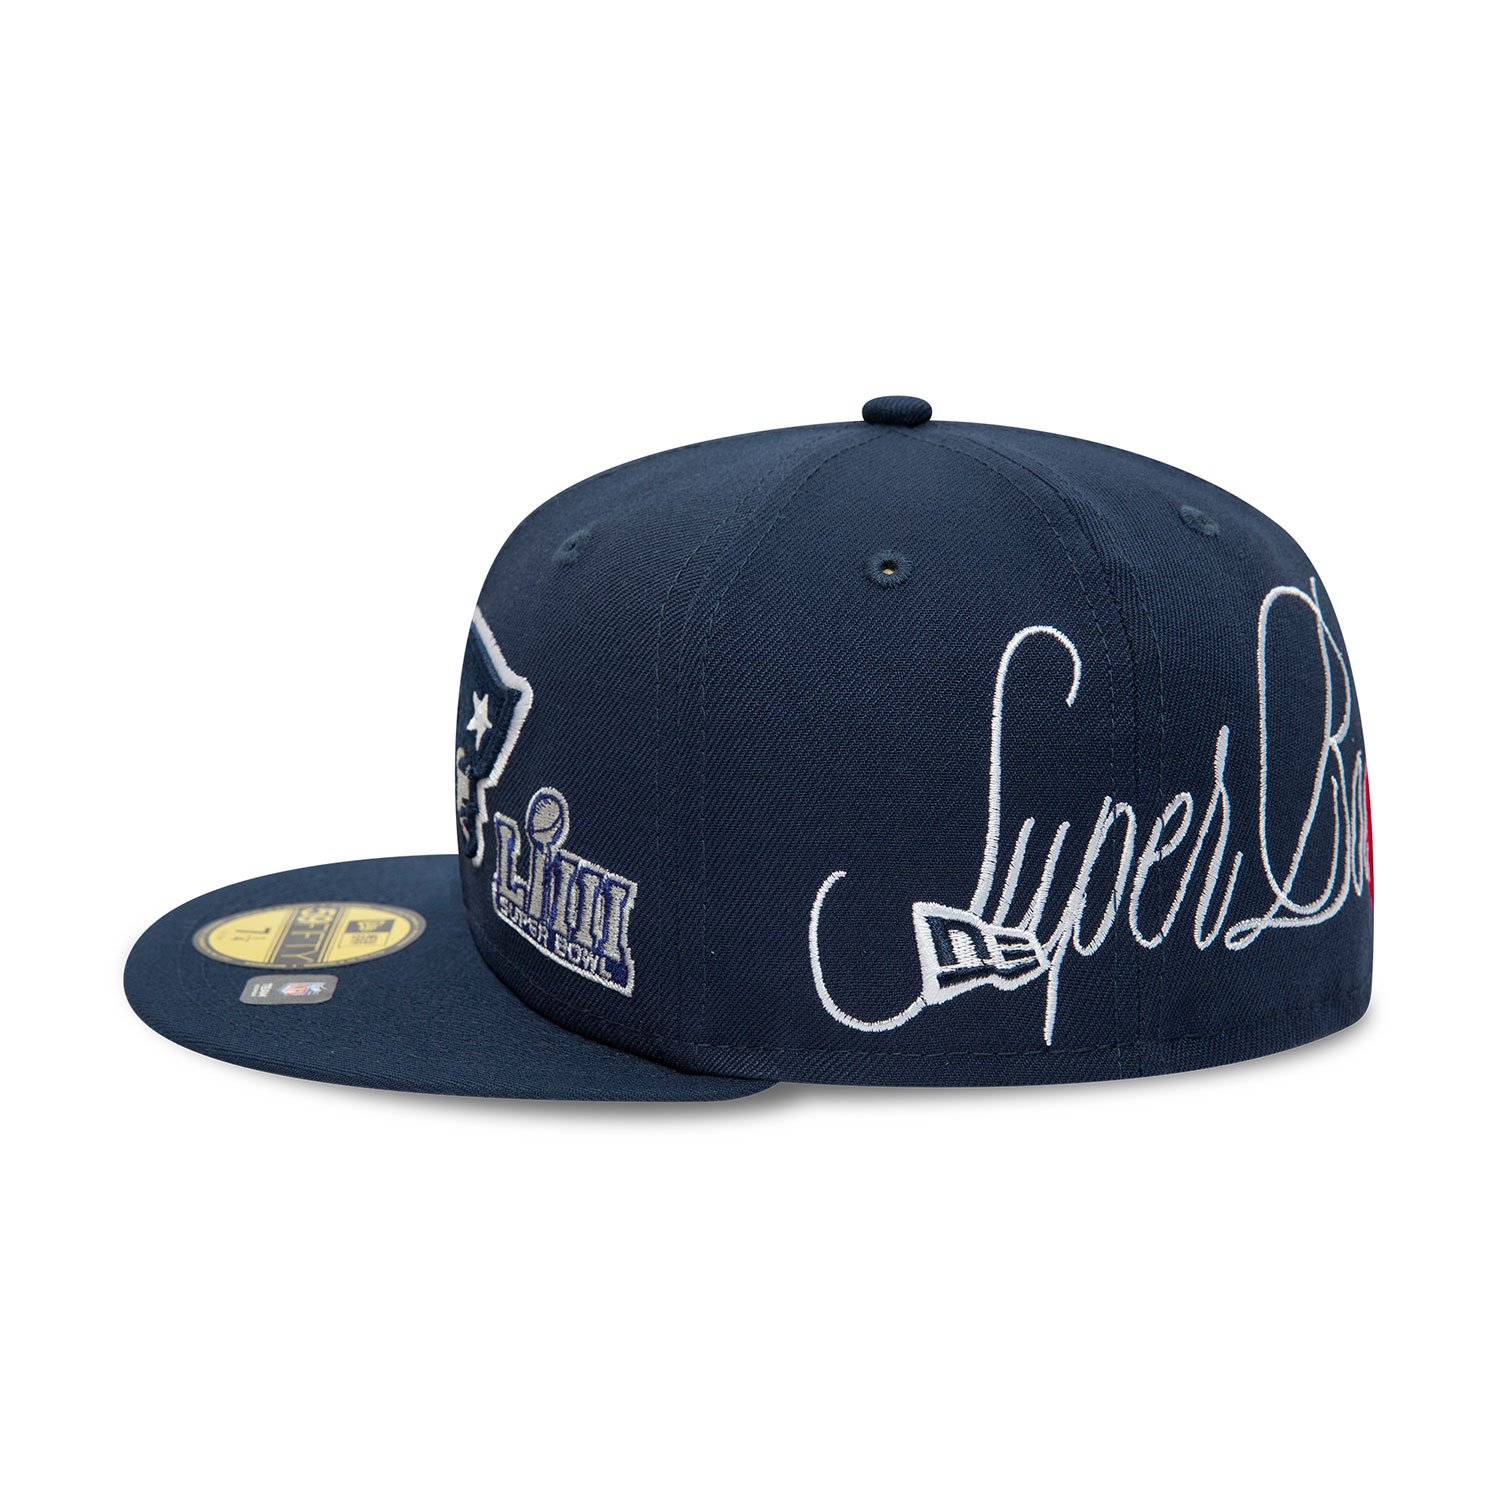 New England Patriots Historic Champs Navy 59FIFTY Fitted Cap